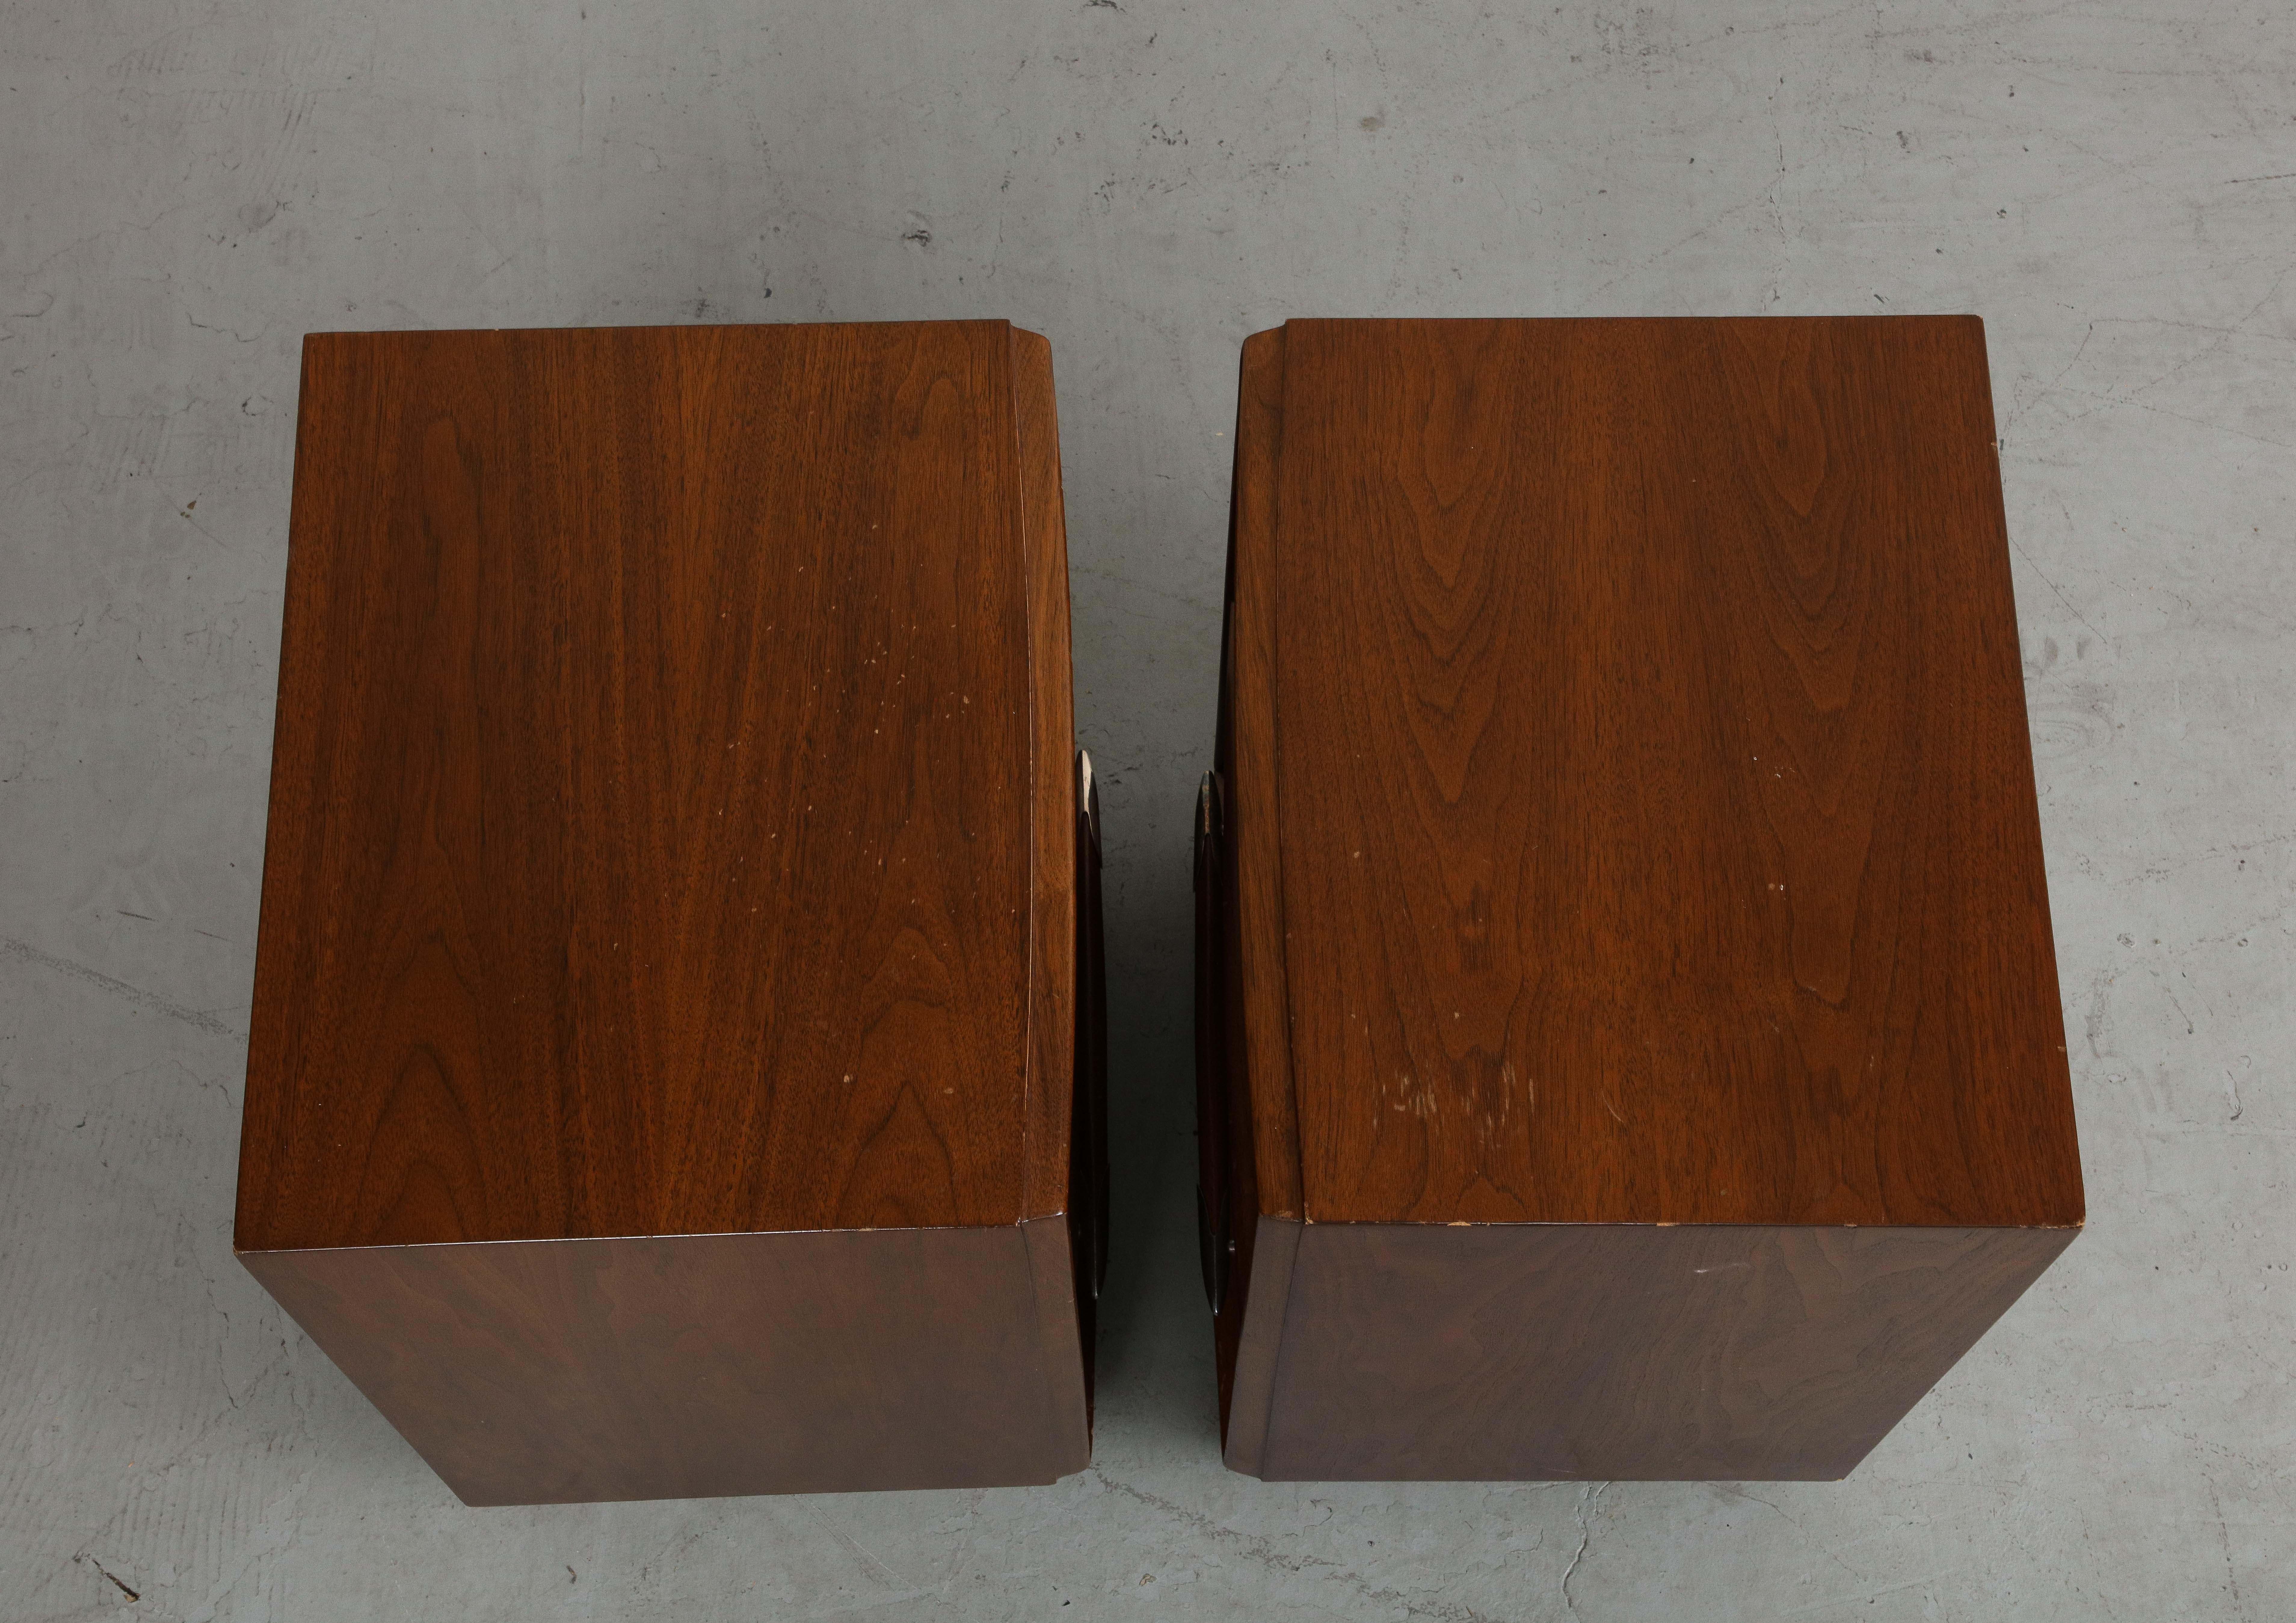 Pair of 1950s Walnut Nightstands or End Tables, Robsjohn-Gibbings for Widdicomb For Sale 2